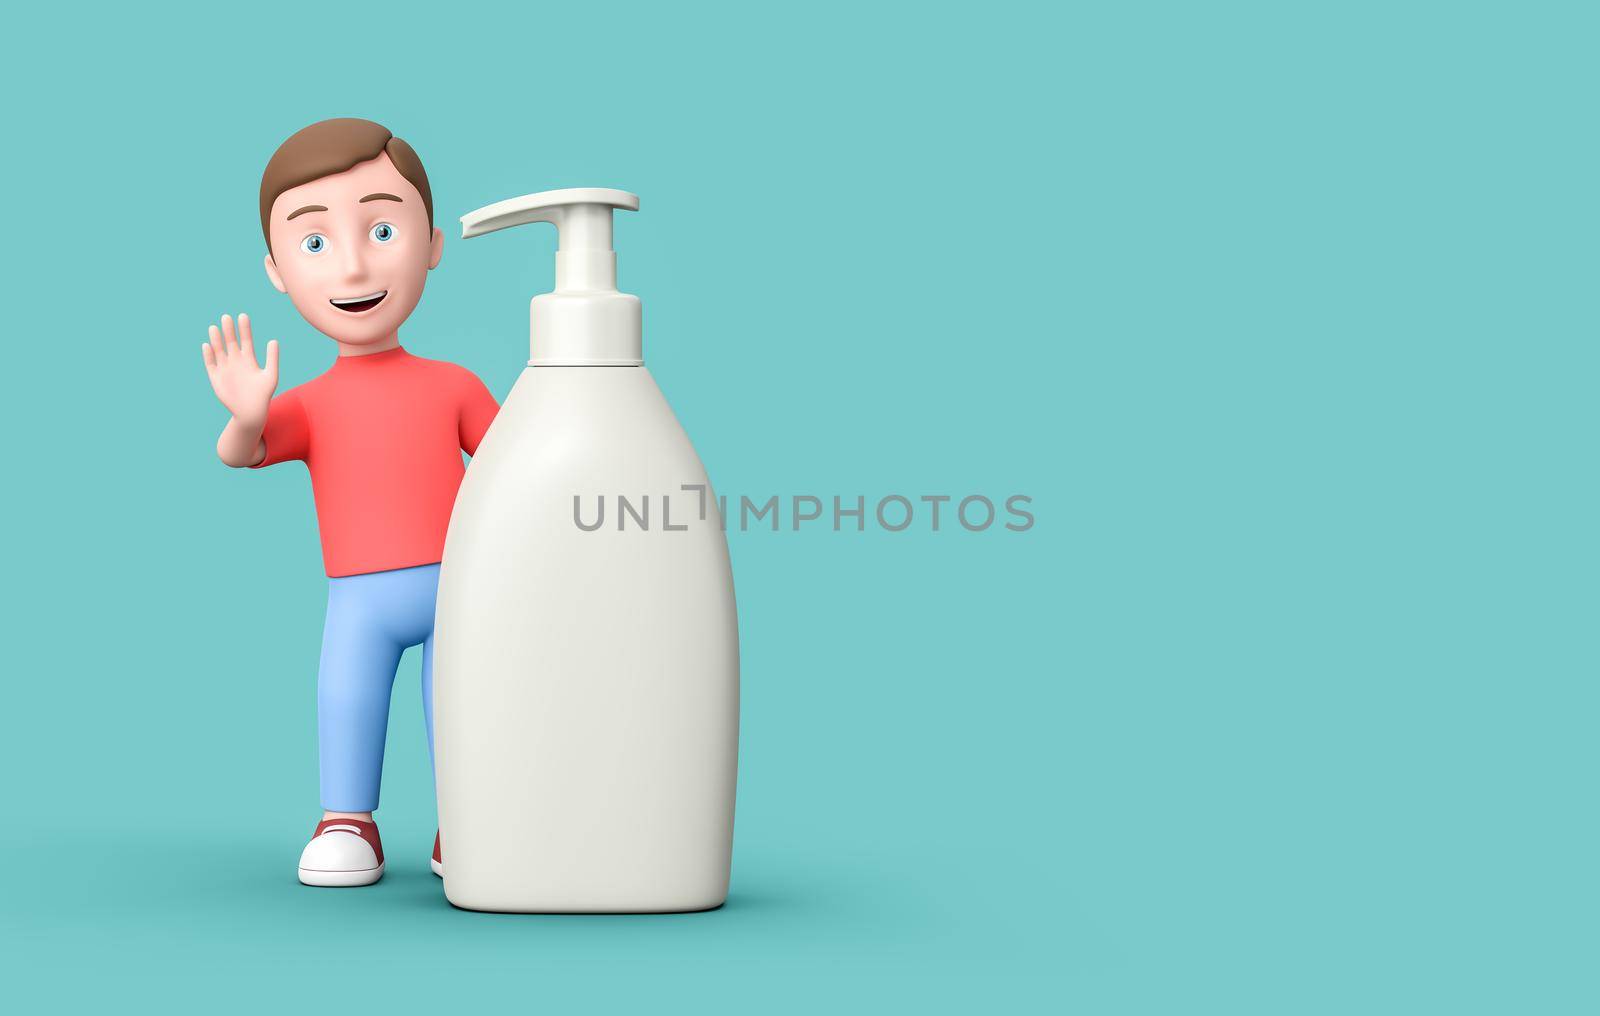 3D Cartoon Character with Soap Dispenser on Blue Background with Copy Space by make